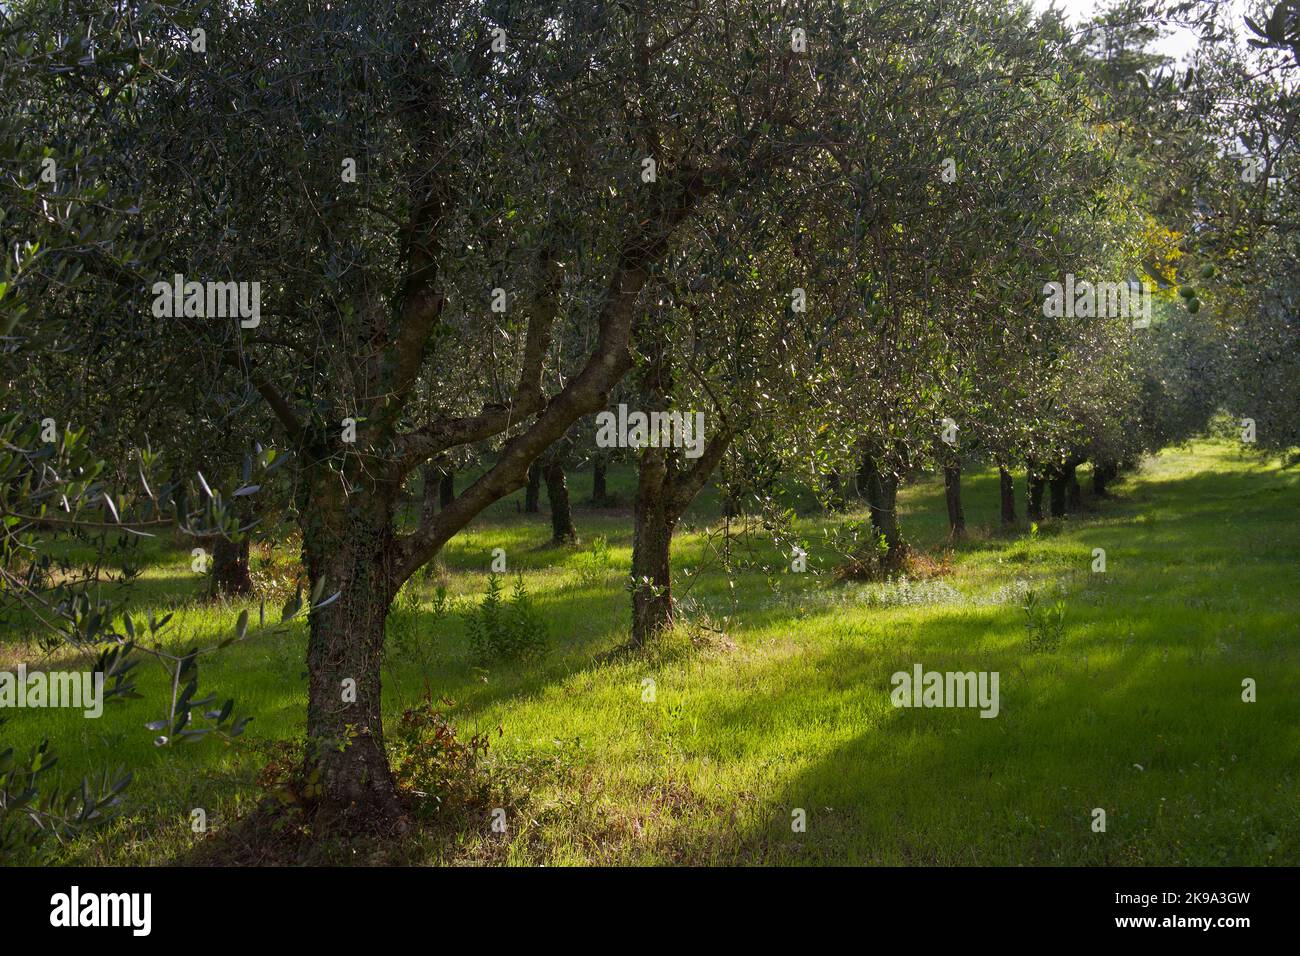 View in Olive orchard, trees in rows, sunspots on the ground Stock Photo